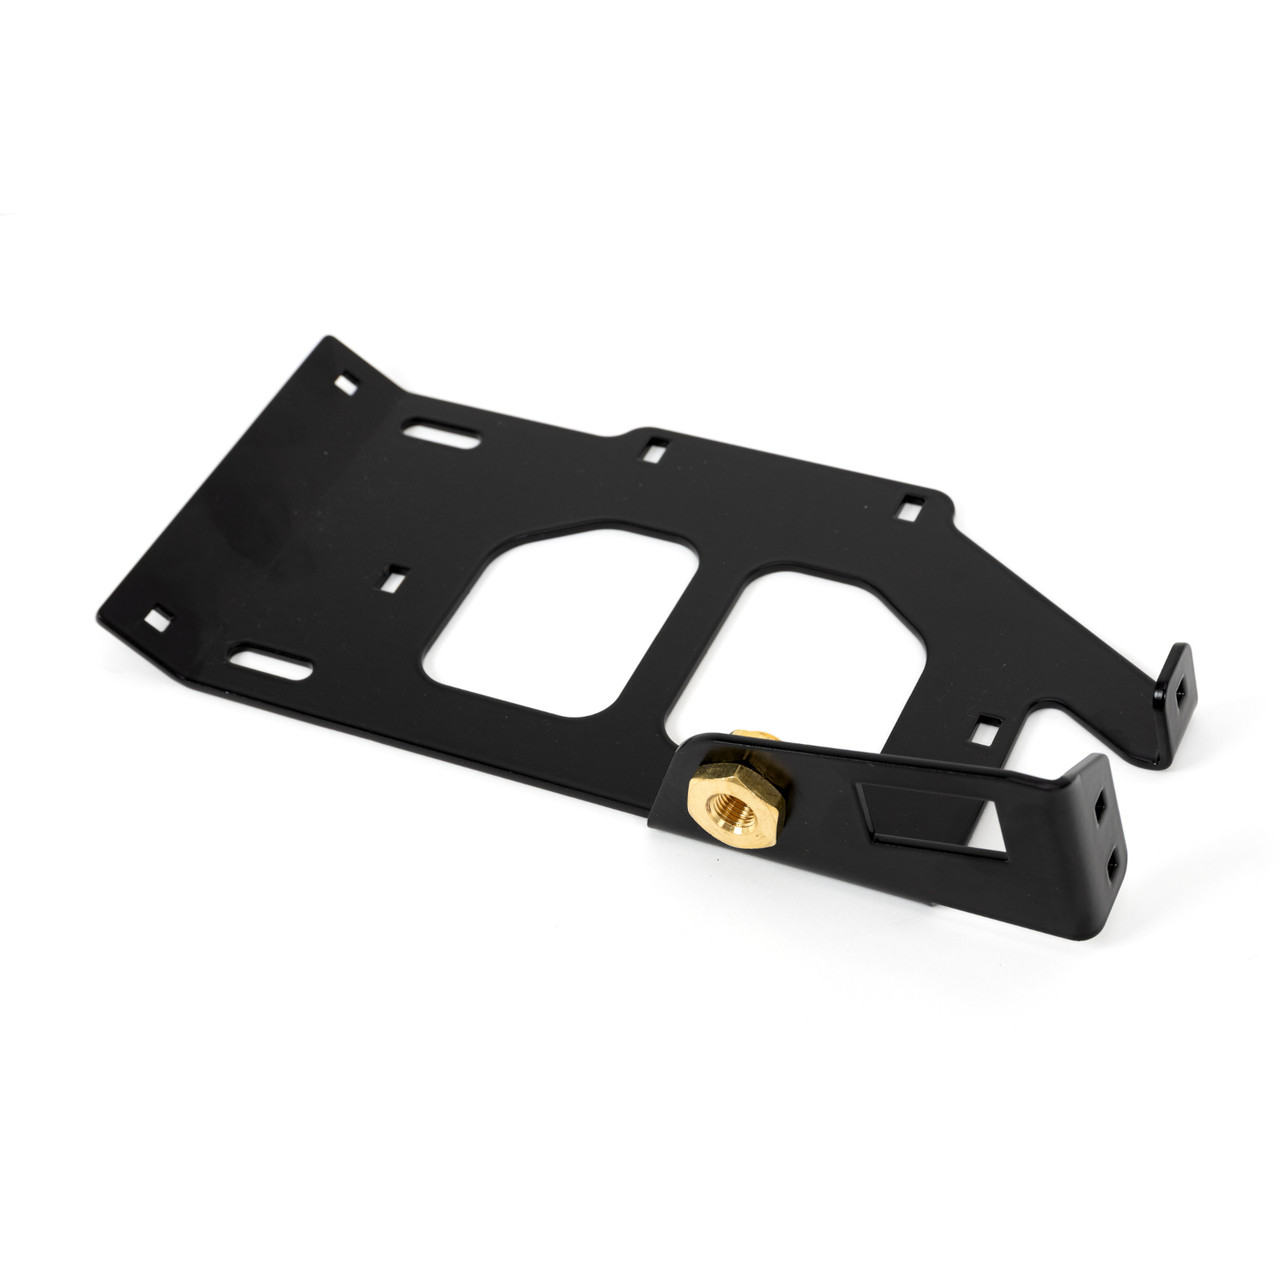 Grimm Offroad 10387 ARB Twin Air Compressor Mounting Bracket Kit for Ford Bronco